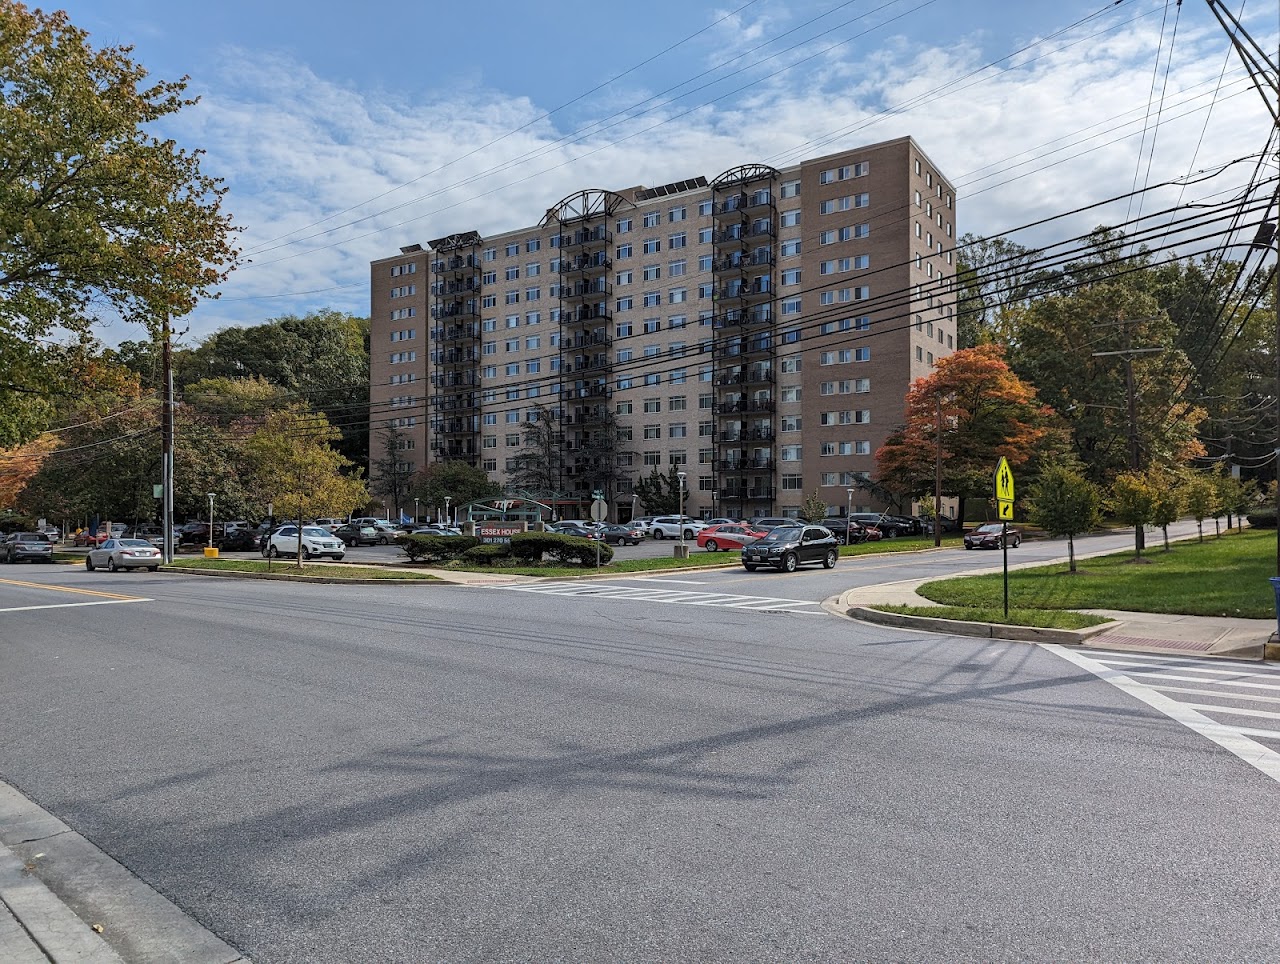 Photo of ESSEX HOUSE. Affordable housing located at 7777 MAPLE AVE TAKOMA PARK, MD 20912